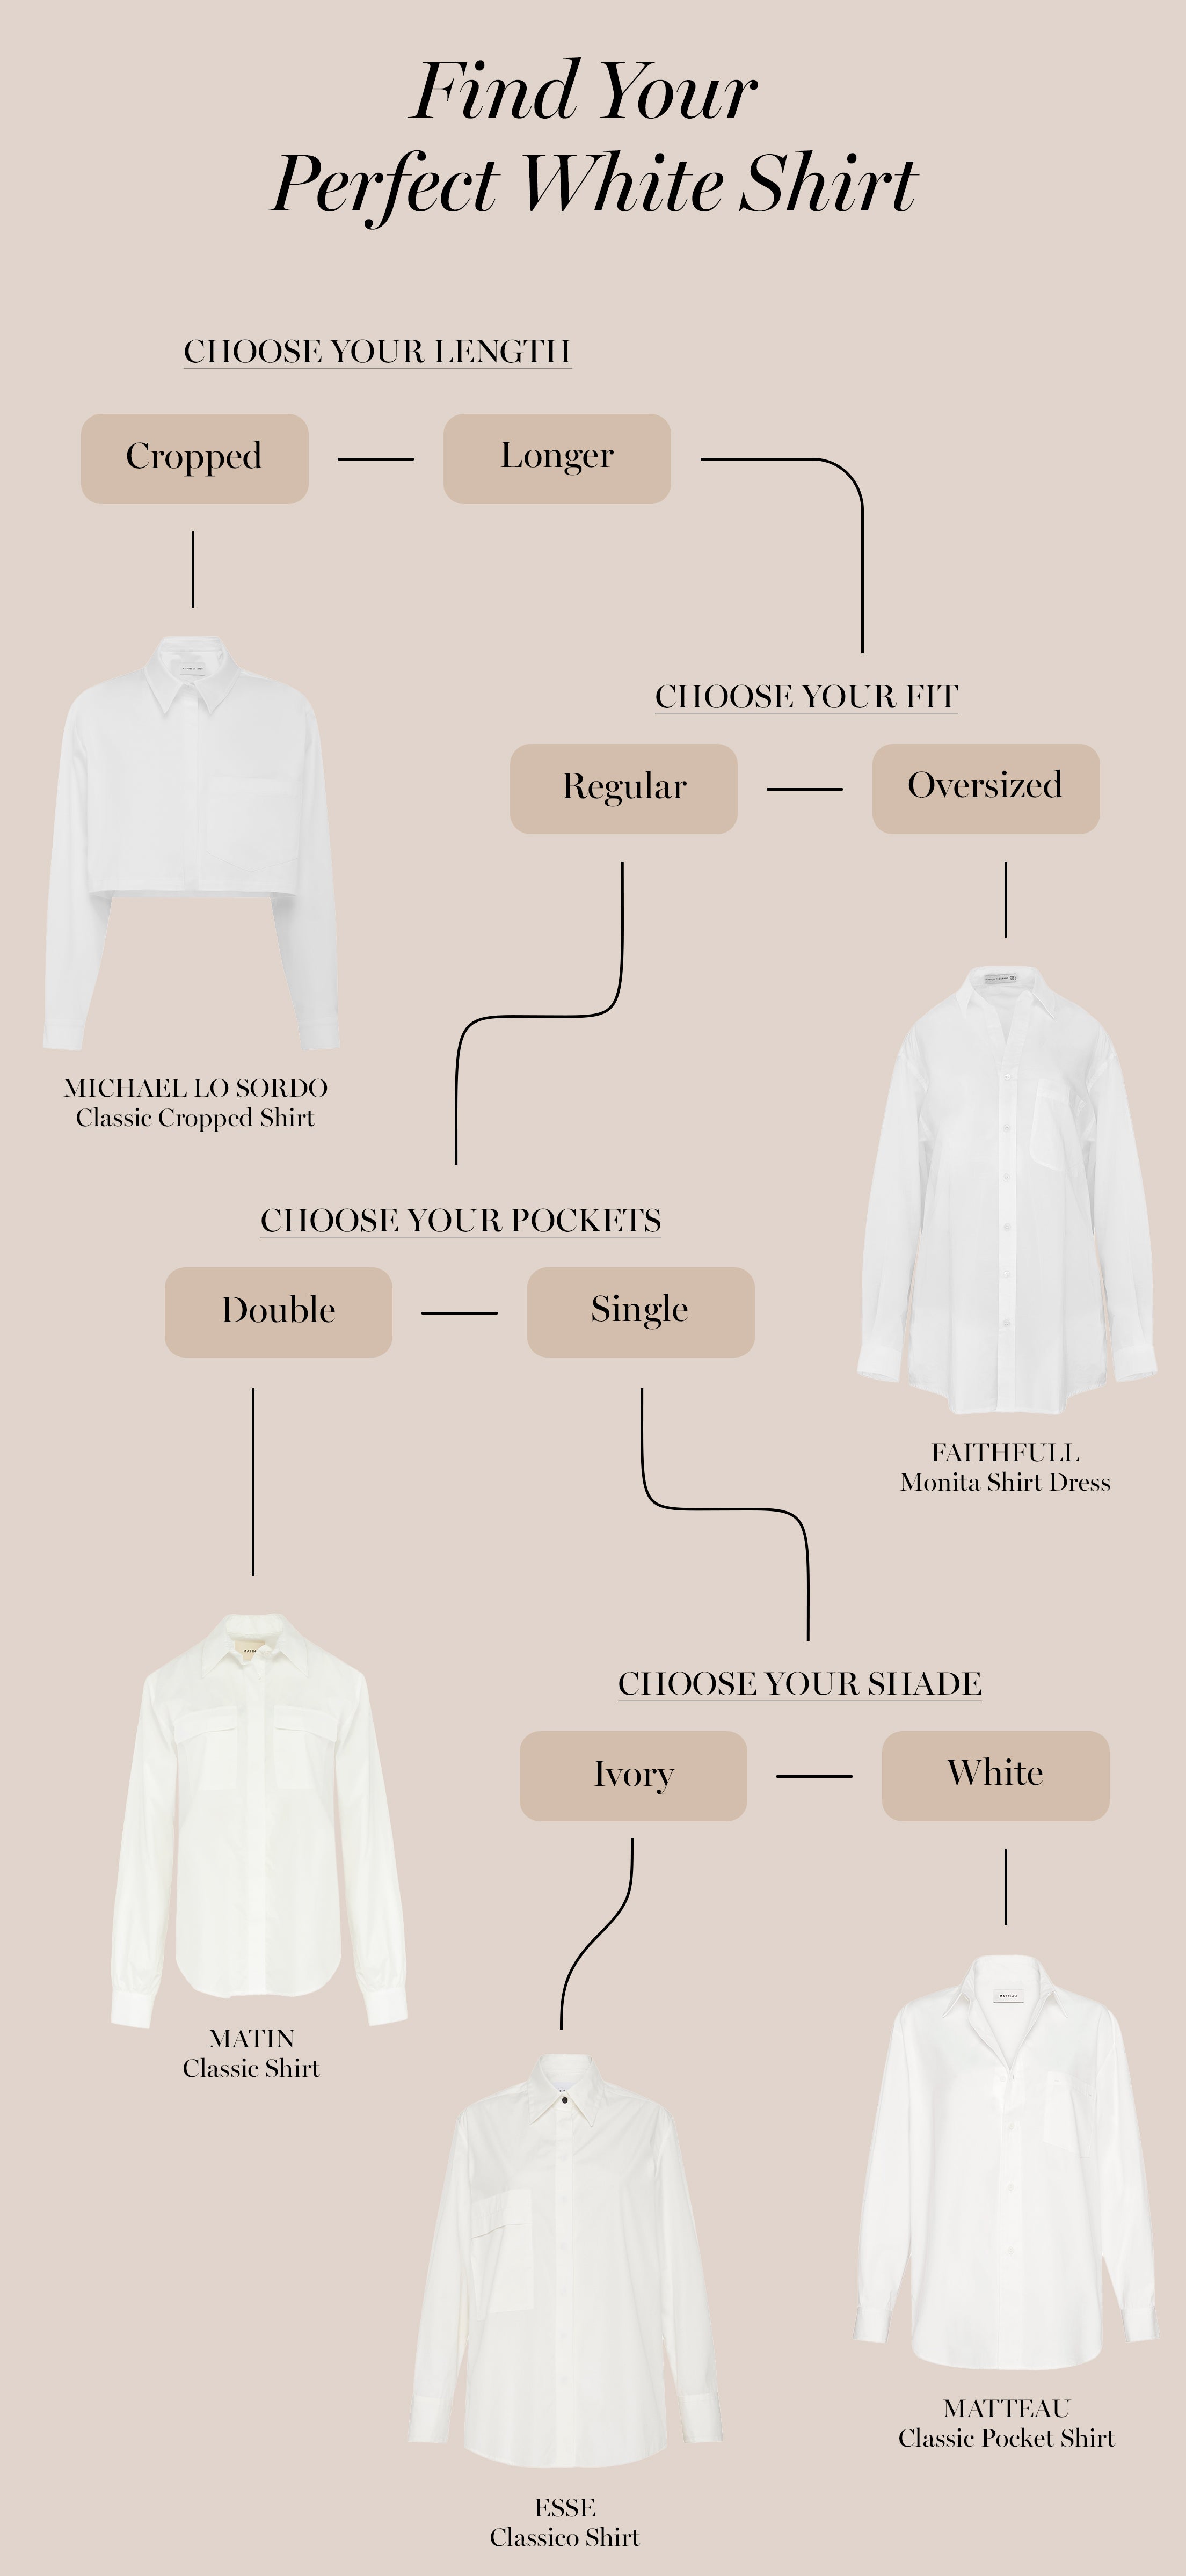 Find Your Perfect White Shirt | The UNDONE